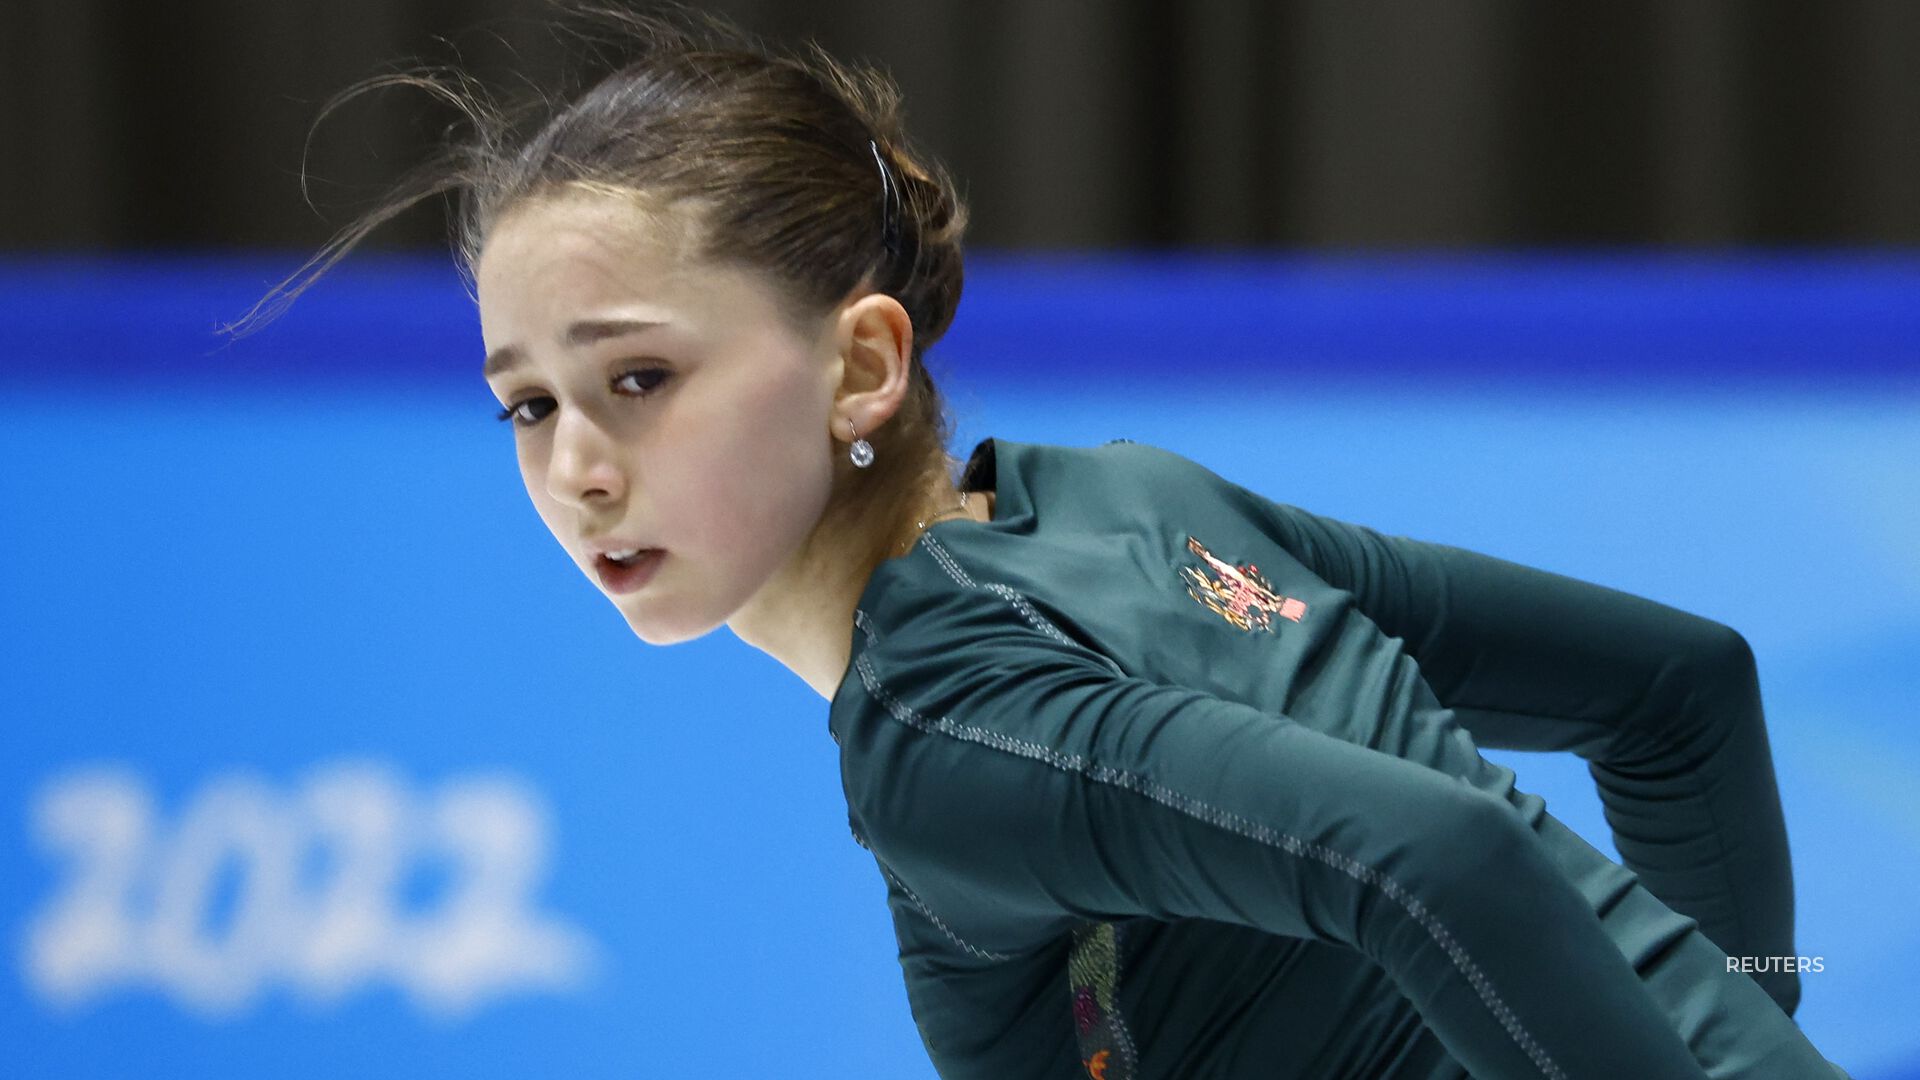 A court ruled that despite a positive test for a banned substance, Russian figure skater Kamila Valieva will be able to compete at the Olympics.